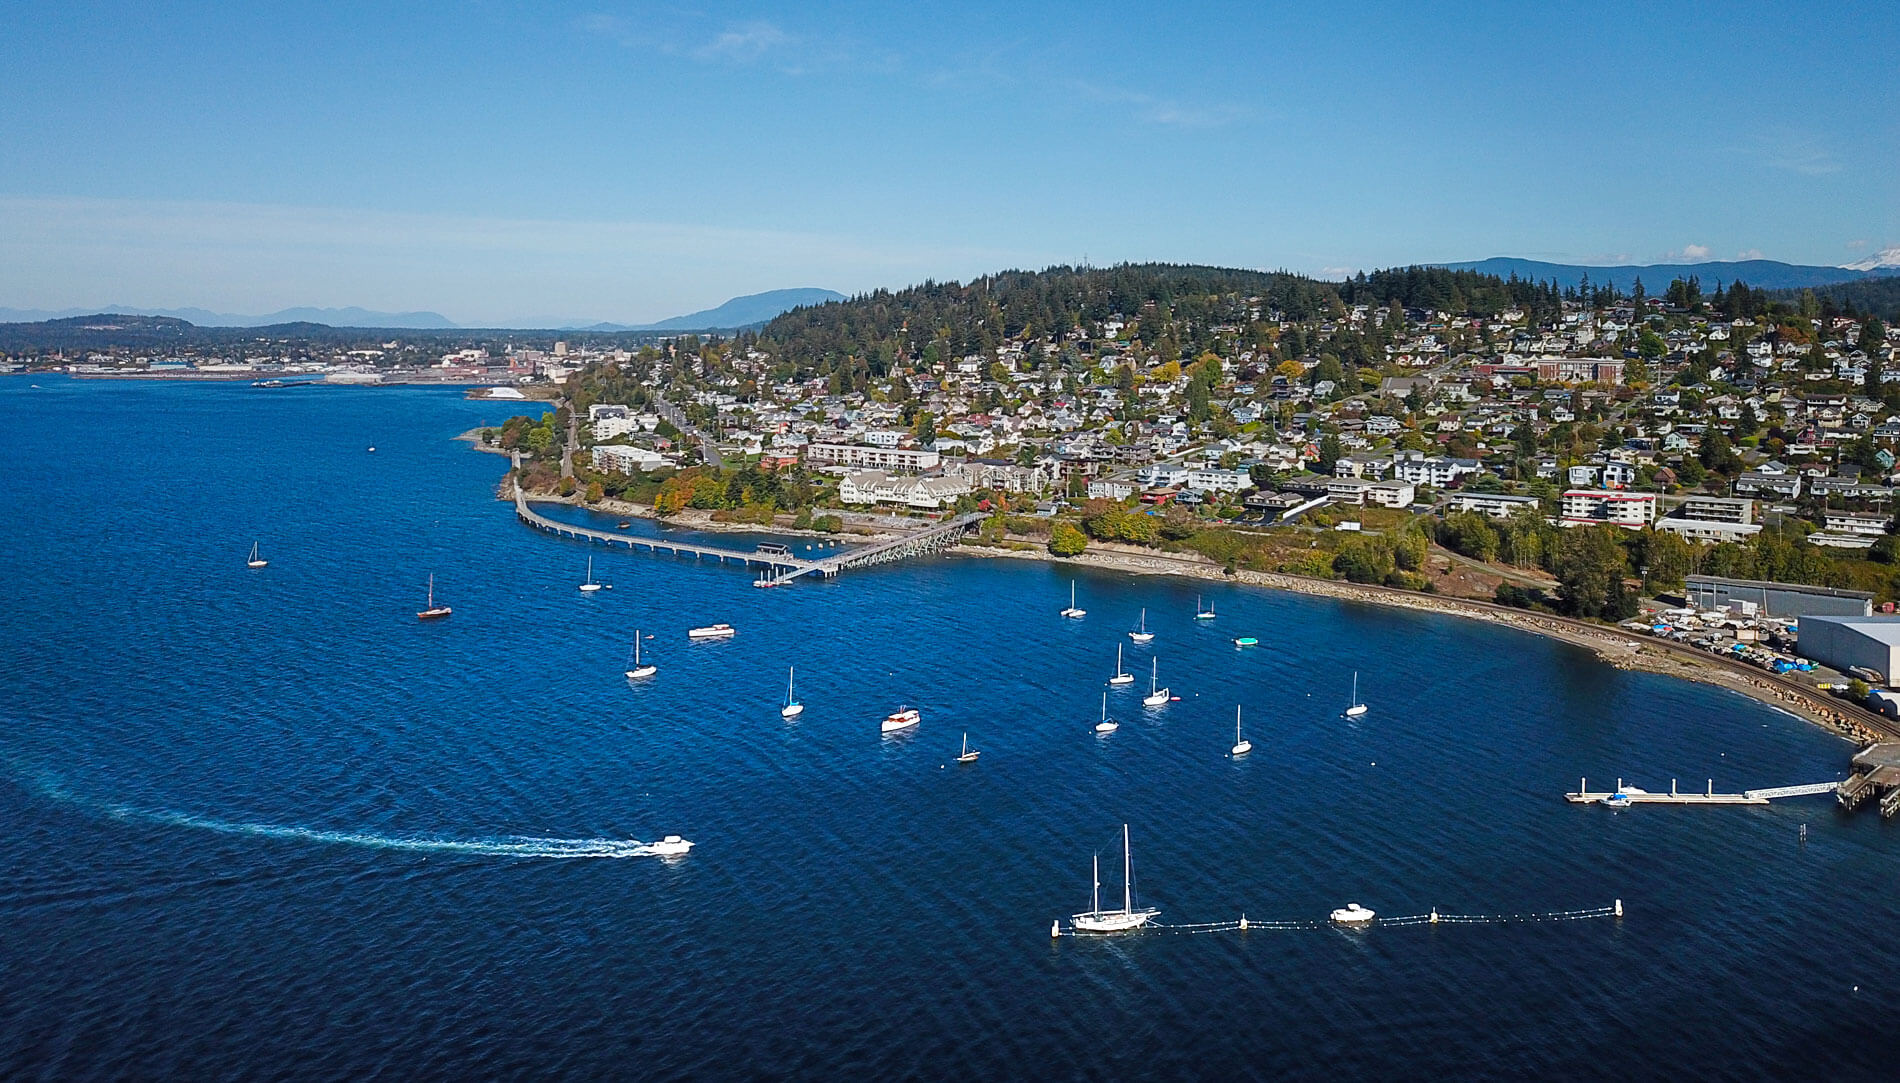 Bellingham's Taylor Dock and the Fairhaven Historic District viewed from above the blue waters of Bellingham Bay